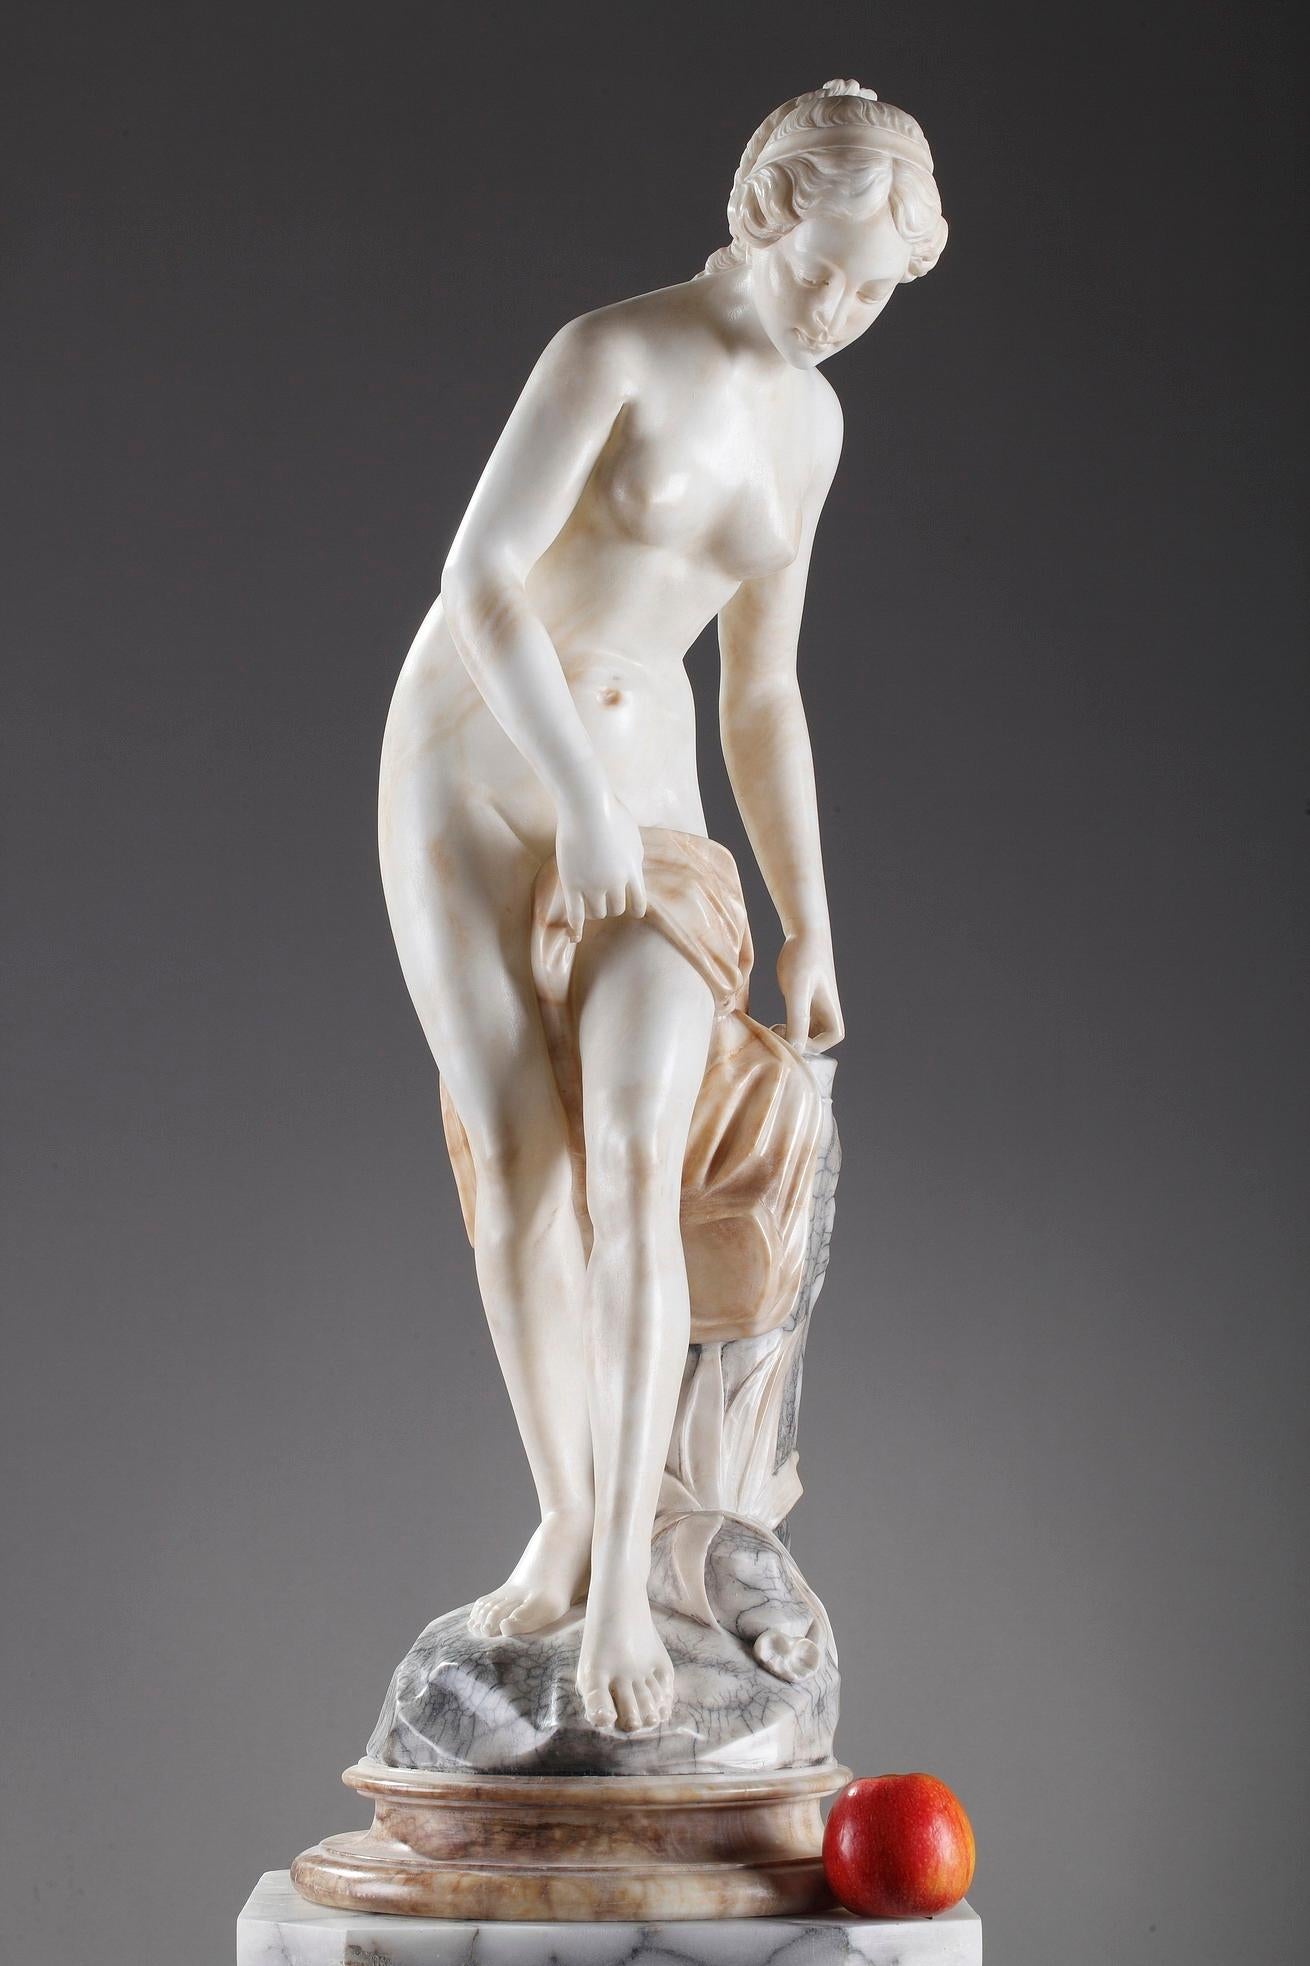 For this marble statue Nymph going in the bath, Etienne-Maurice Falconet (French, 1716-1791) was inspired by the Bather painted in 1724 by François Lemoyne. The French sculptor captures the moment before the bath, when the young woman advances